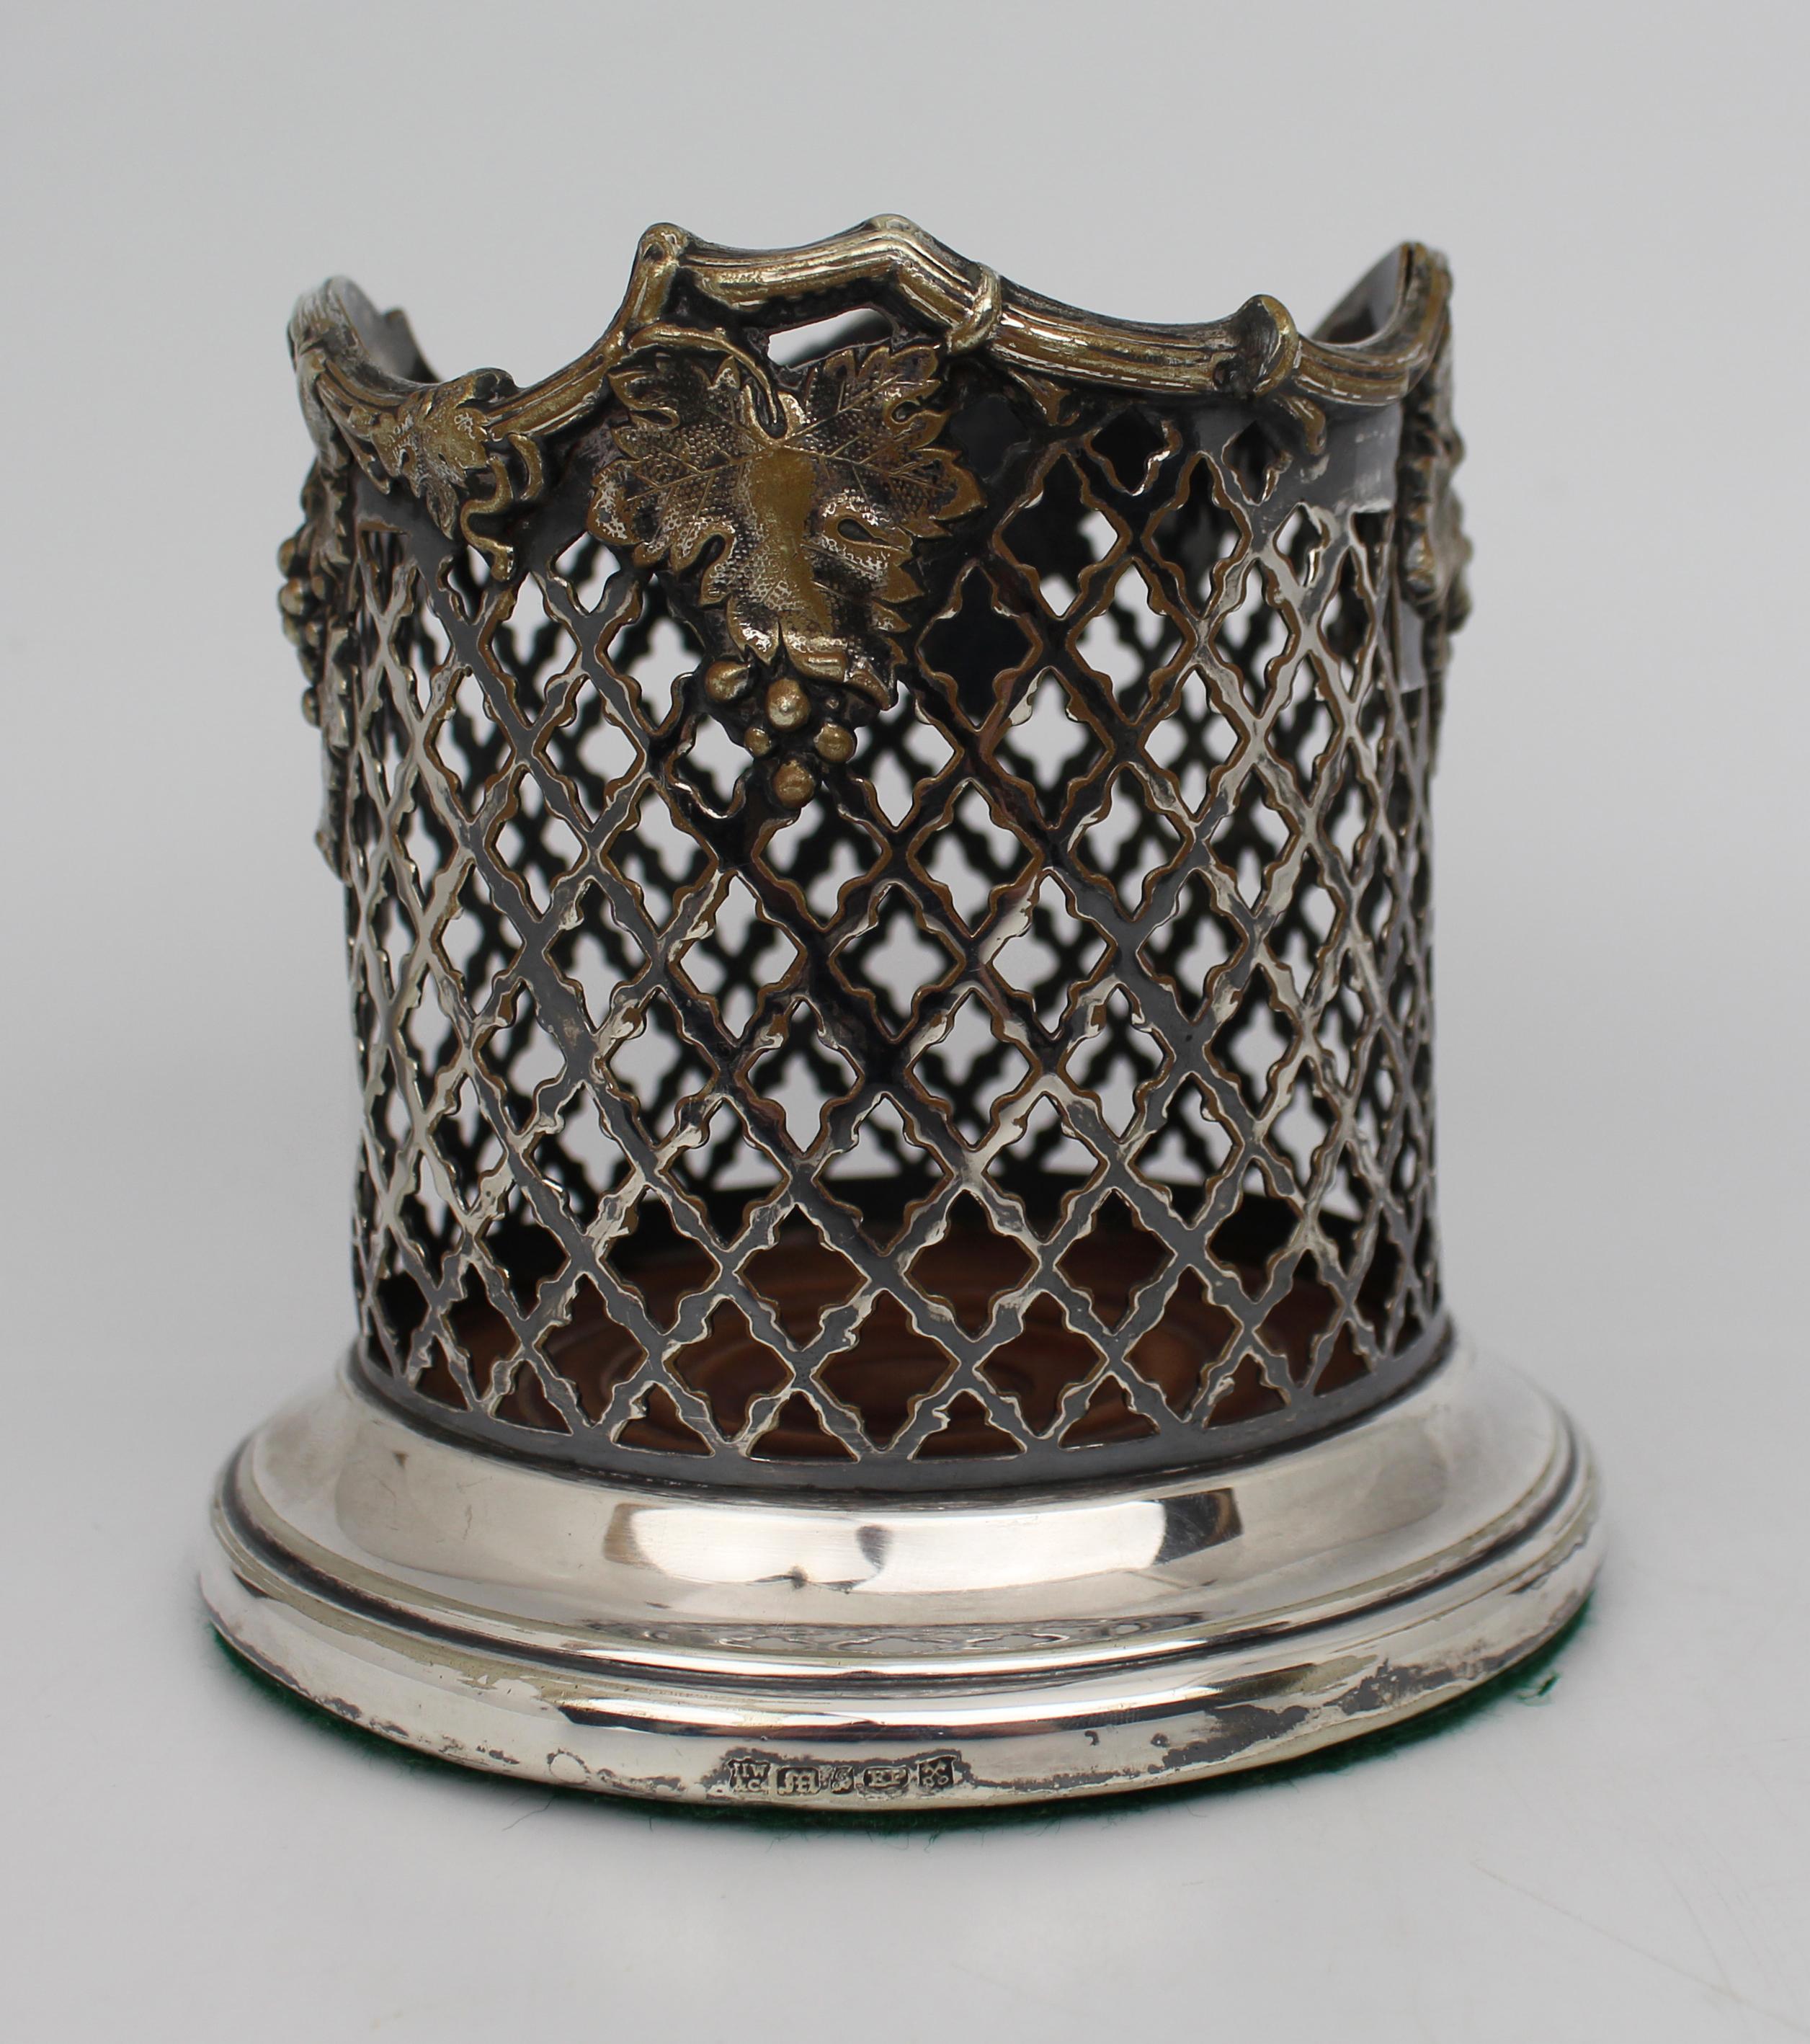 Late Victorian silver plated wine bottle coaster


Henry Wilkinson & Co, Sheffield. Silver plate EP

Turned wooden base, baize lined to the underside

Measures 13 x 13 x 12 (height) cm

Good condition commensurate with age.